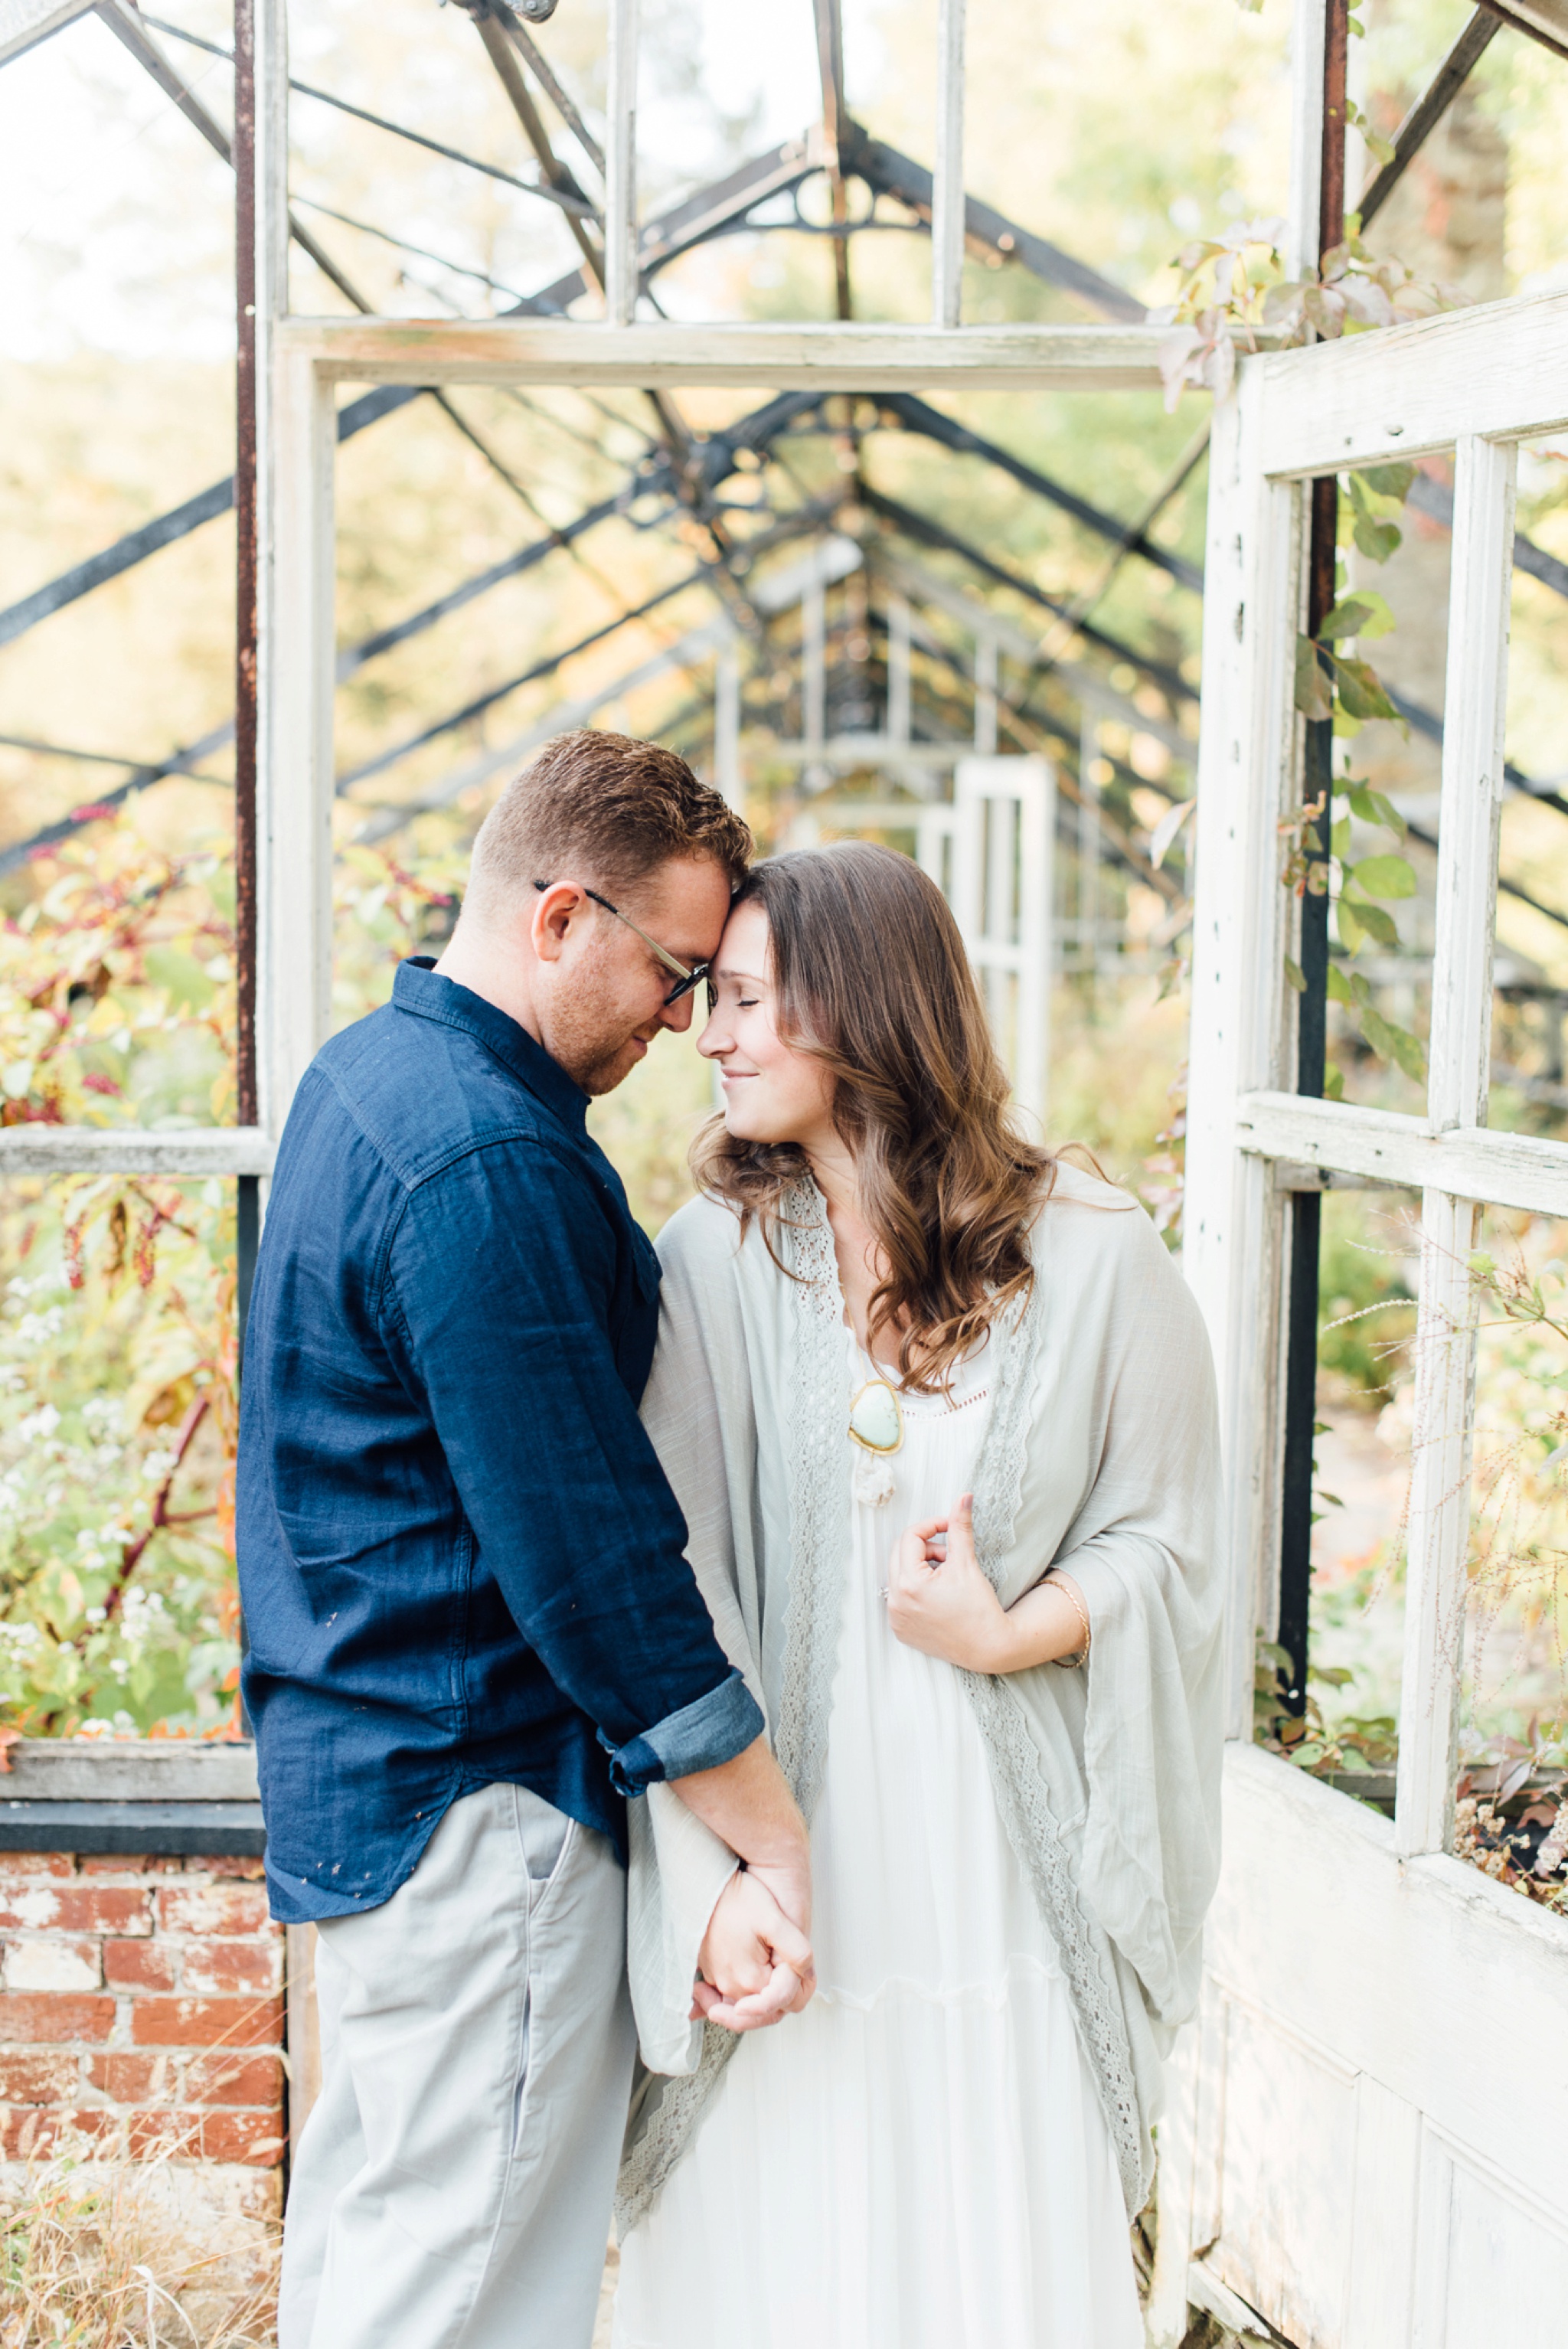 Aaren + Dave - Valley Forge Anniversary Session - Alison Dunn Photography photo